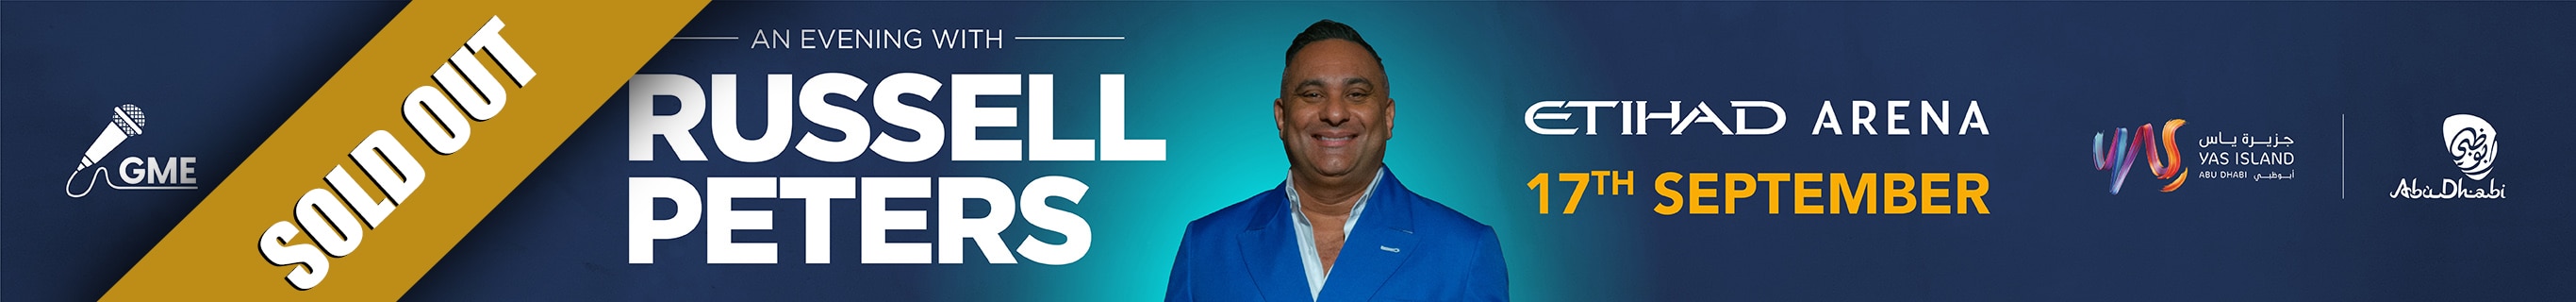 An Evening With Russell Peters 17th September 2021